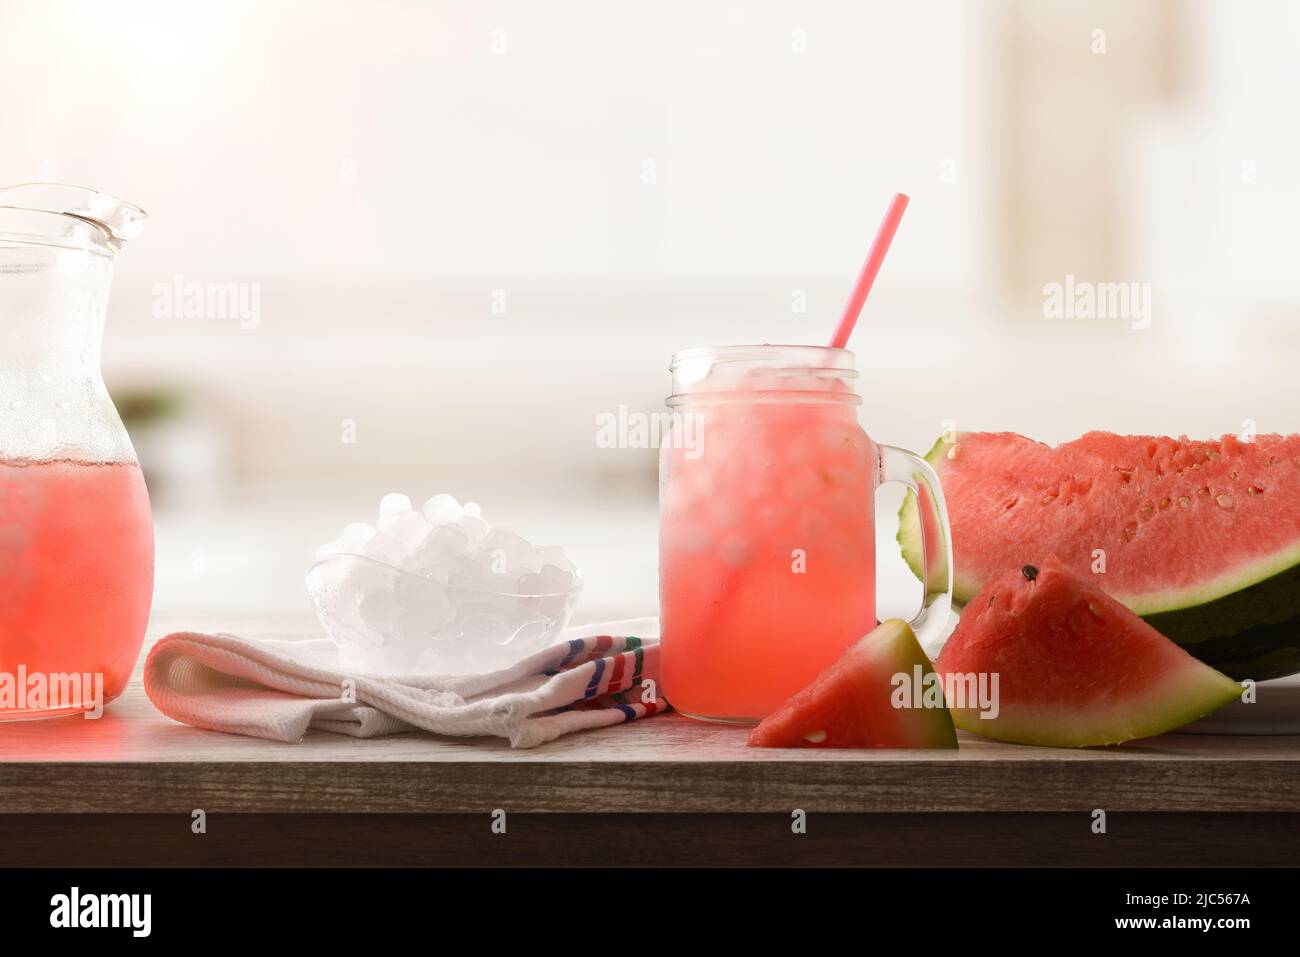 Watermelon slush with sliced fruit and crushed ice in a bowl on wooden table in a kitchen. Front view. Horizontal composition. Stock Photo